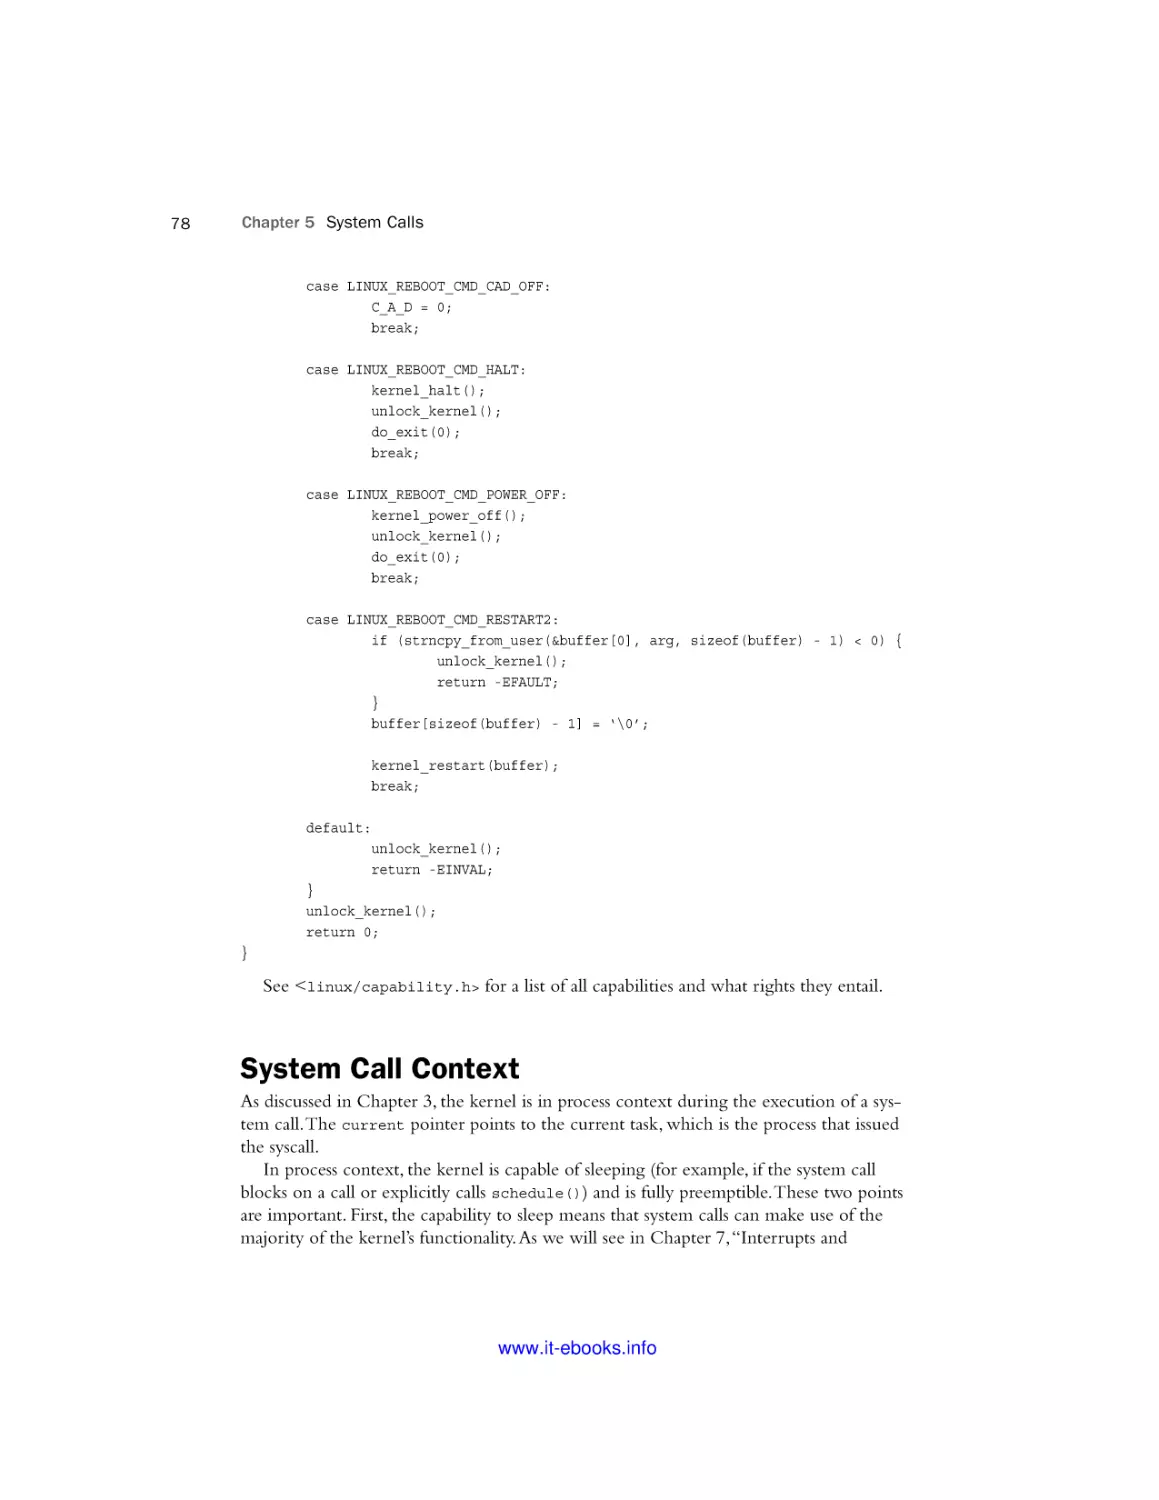 System Call Context